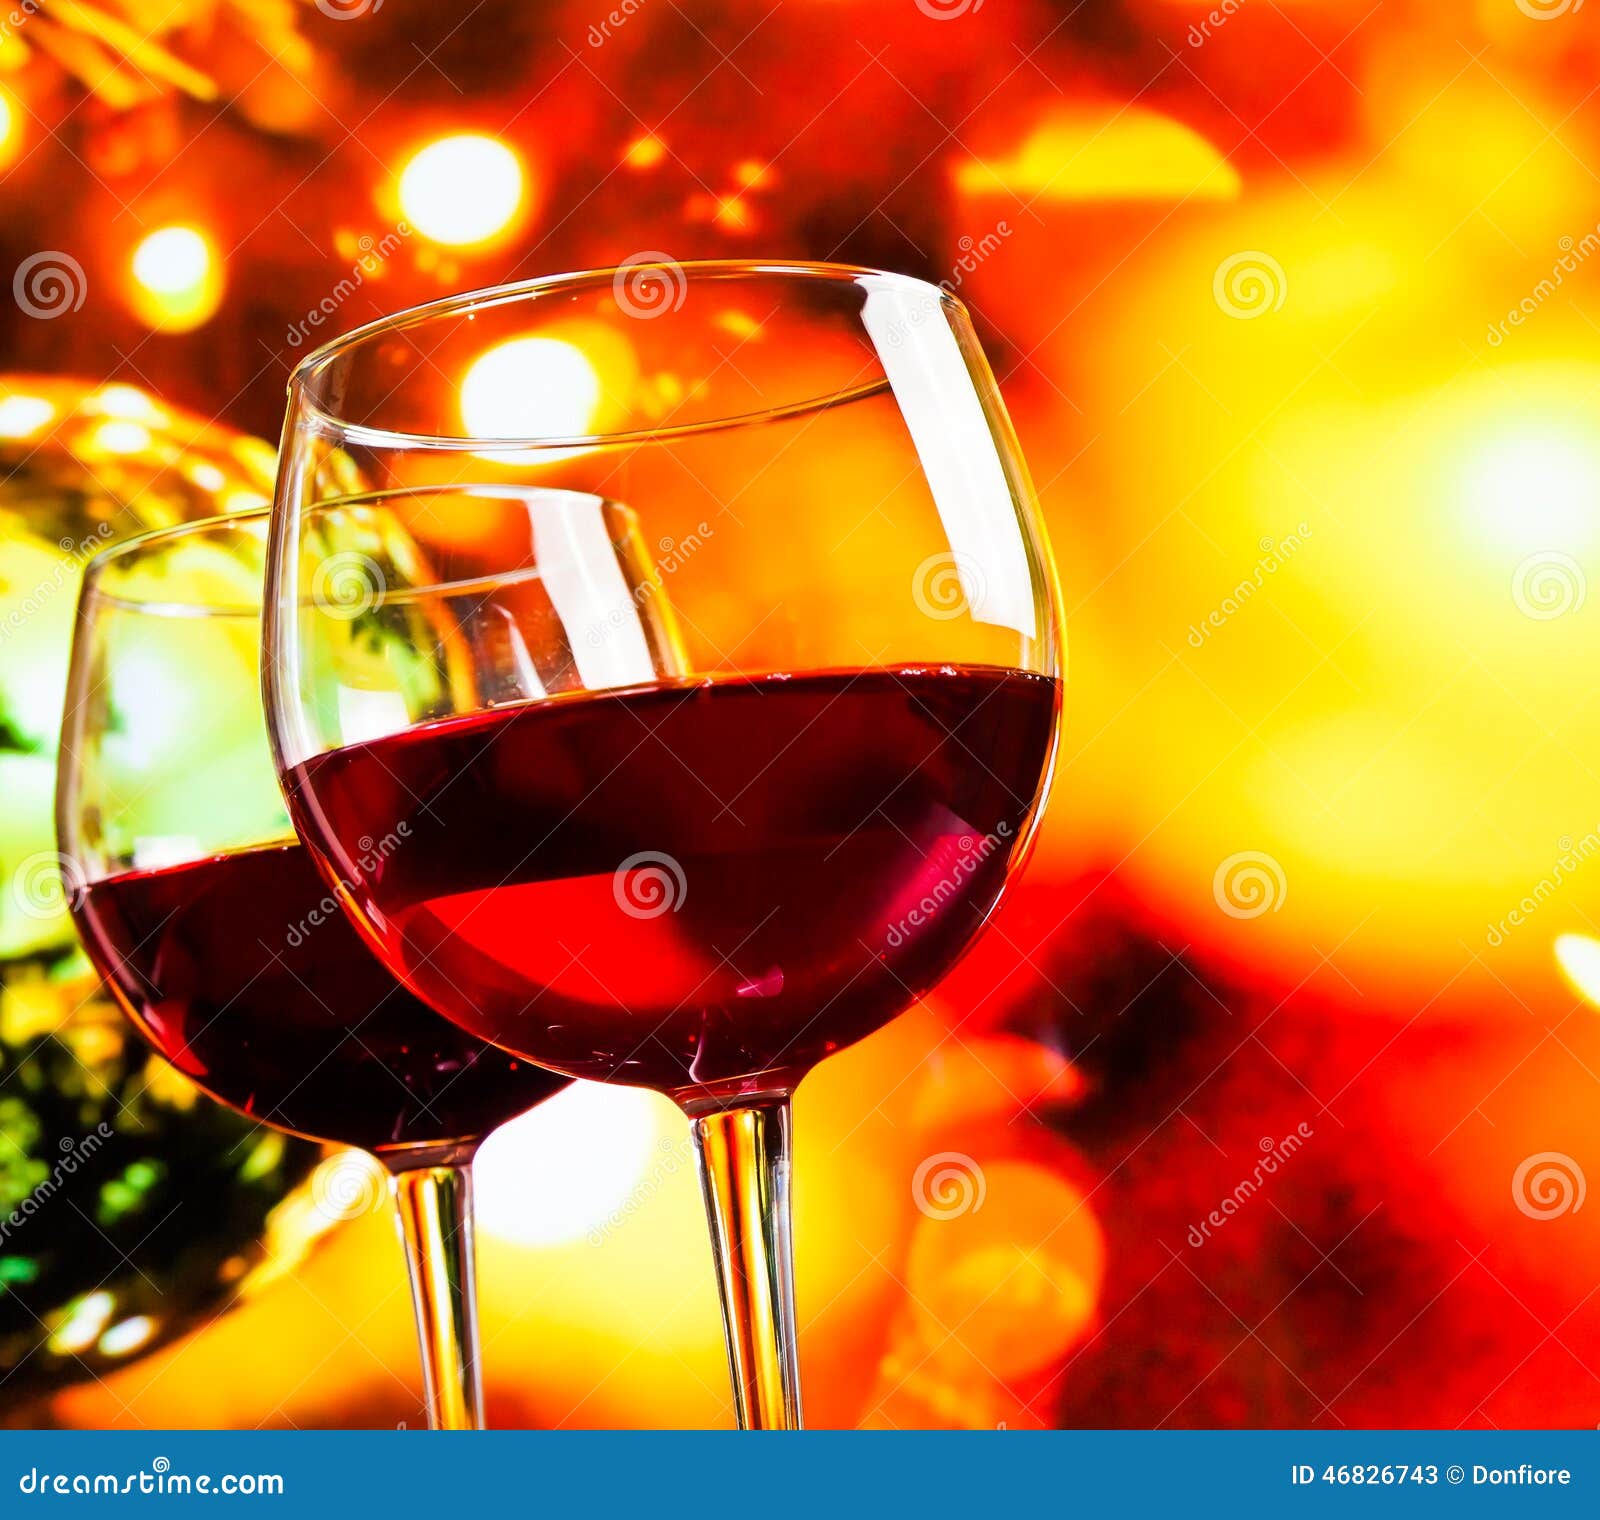 red wine glasses against colorful unfocused lights background